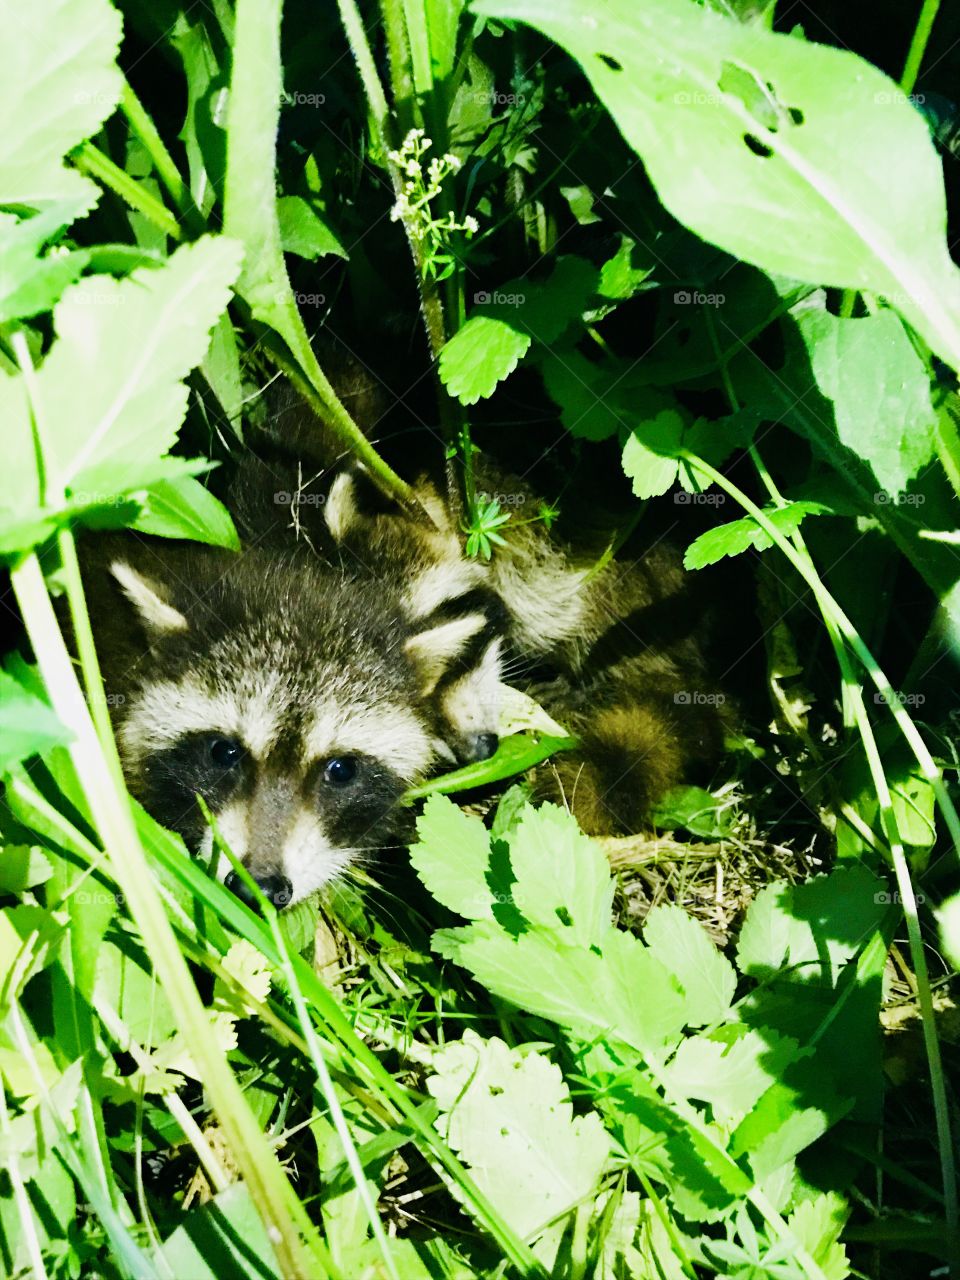 Found two baby raccoons on the side of the road and no mother. 